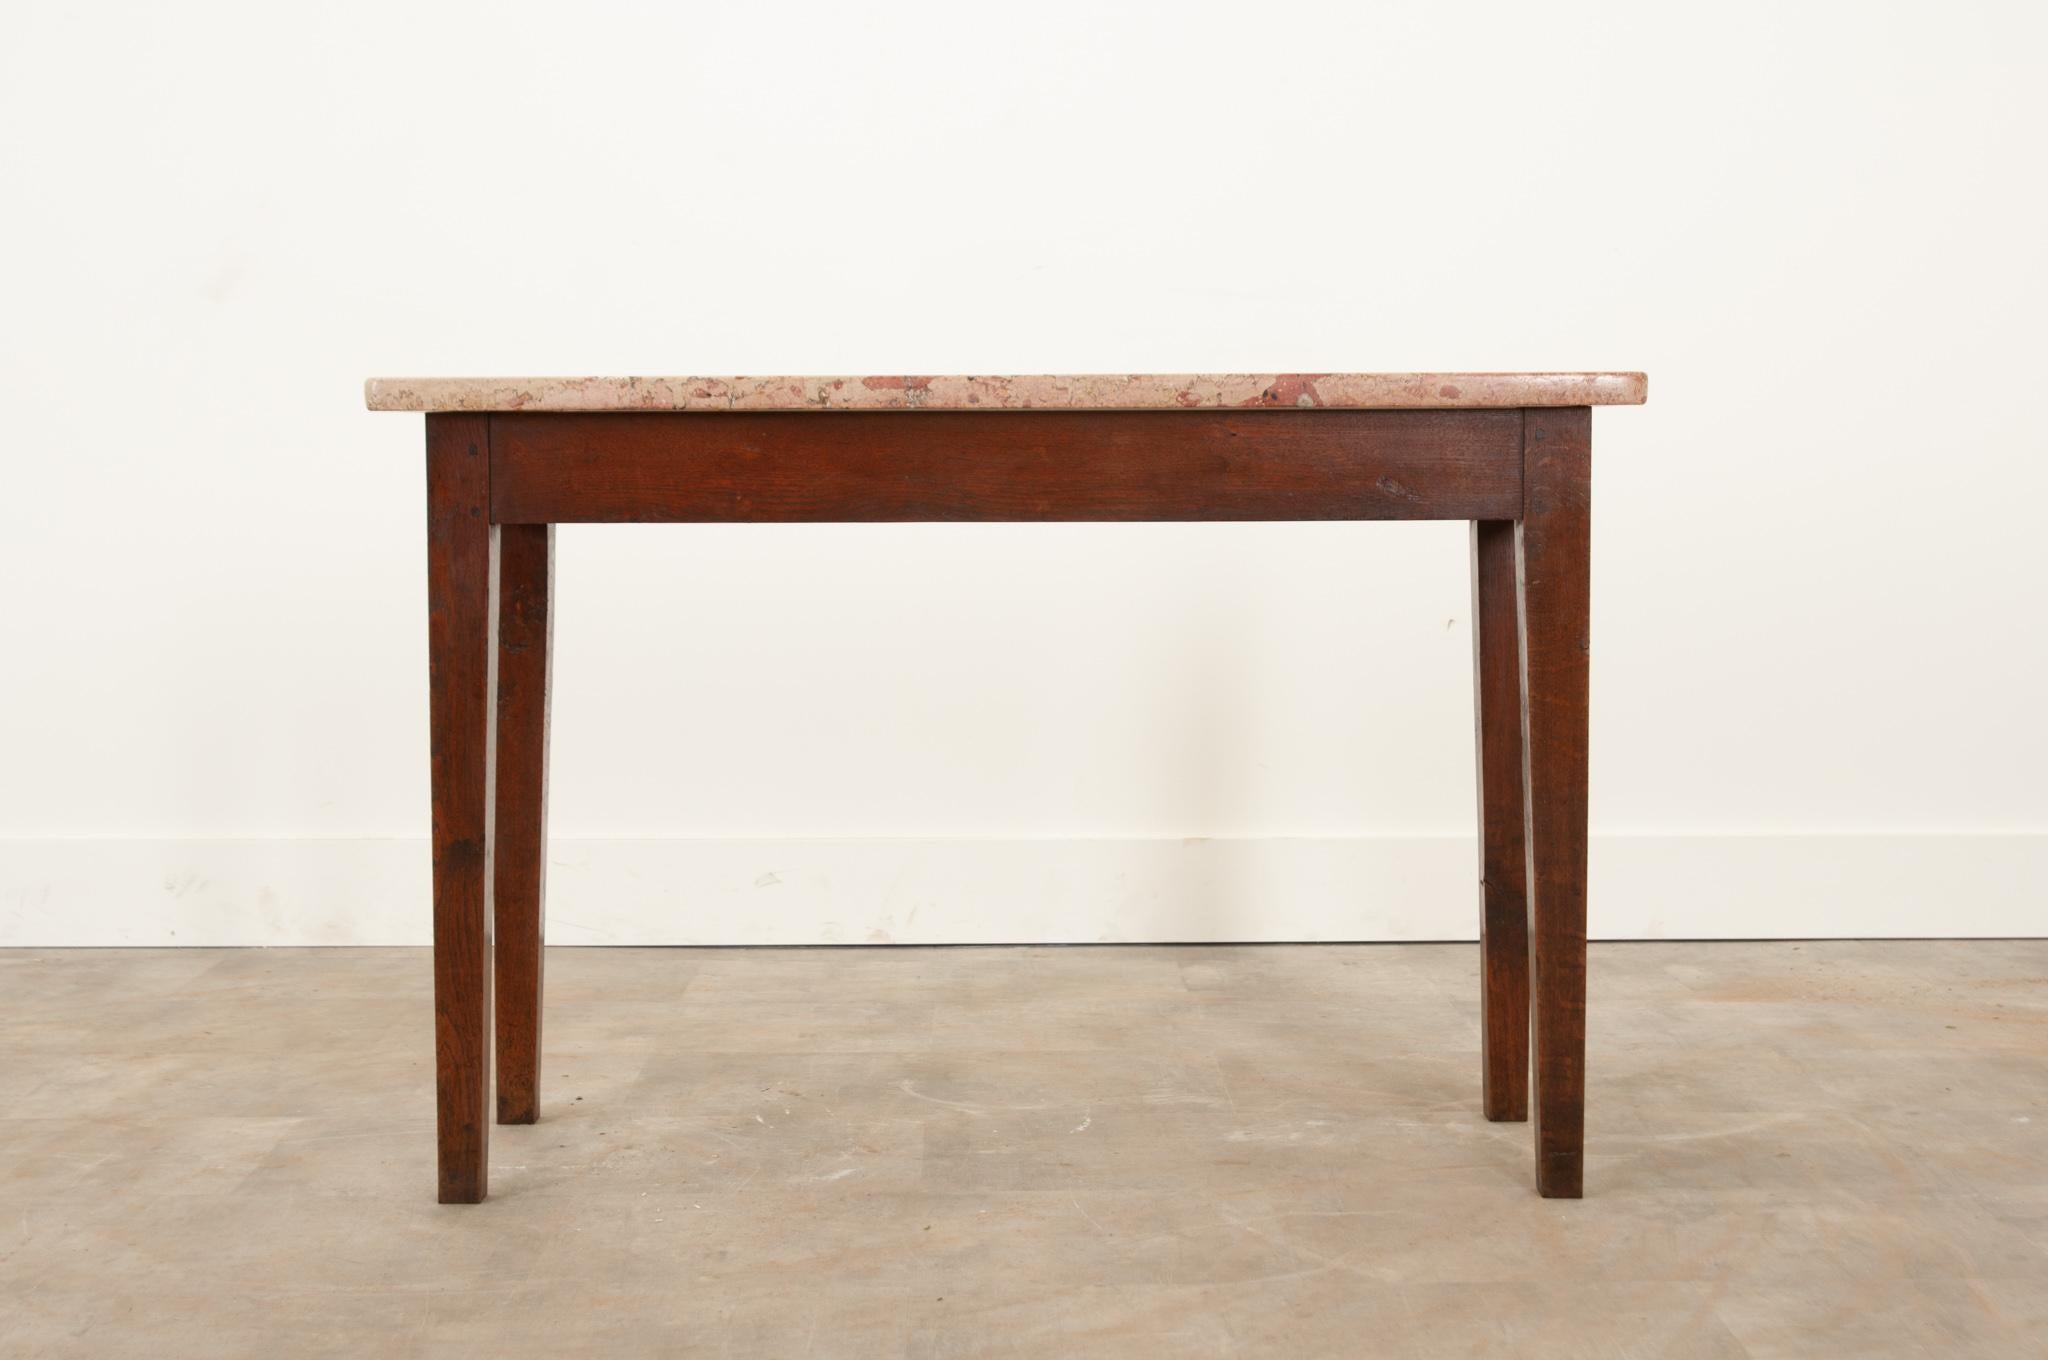 A unique and simply constructed console table, circa 1850. The gorgeous warm colored soapstone top is in wonderful antique condition and adds so much character to any space. A plain oak apron connects to slightly tapered legs with peg- in-hole